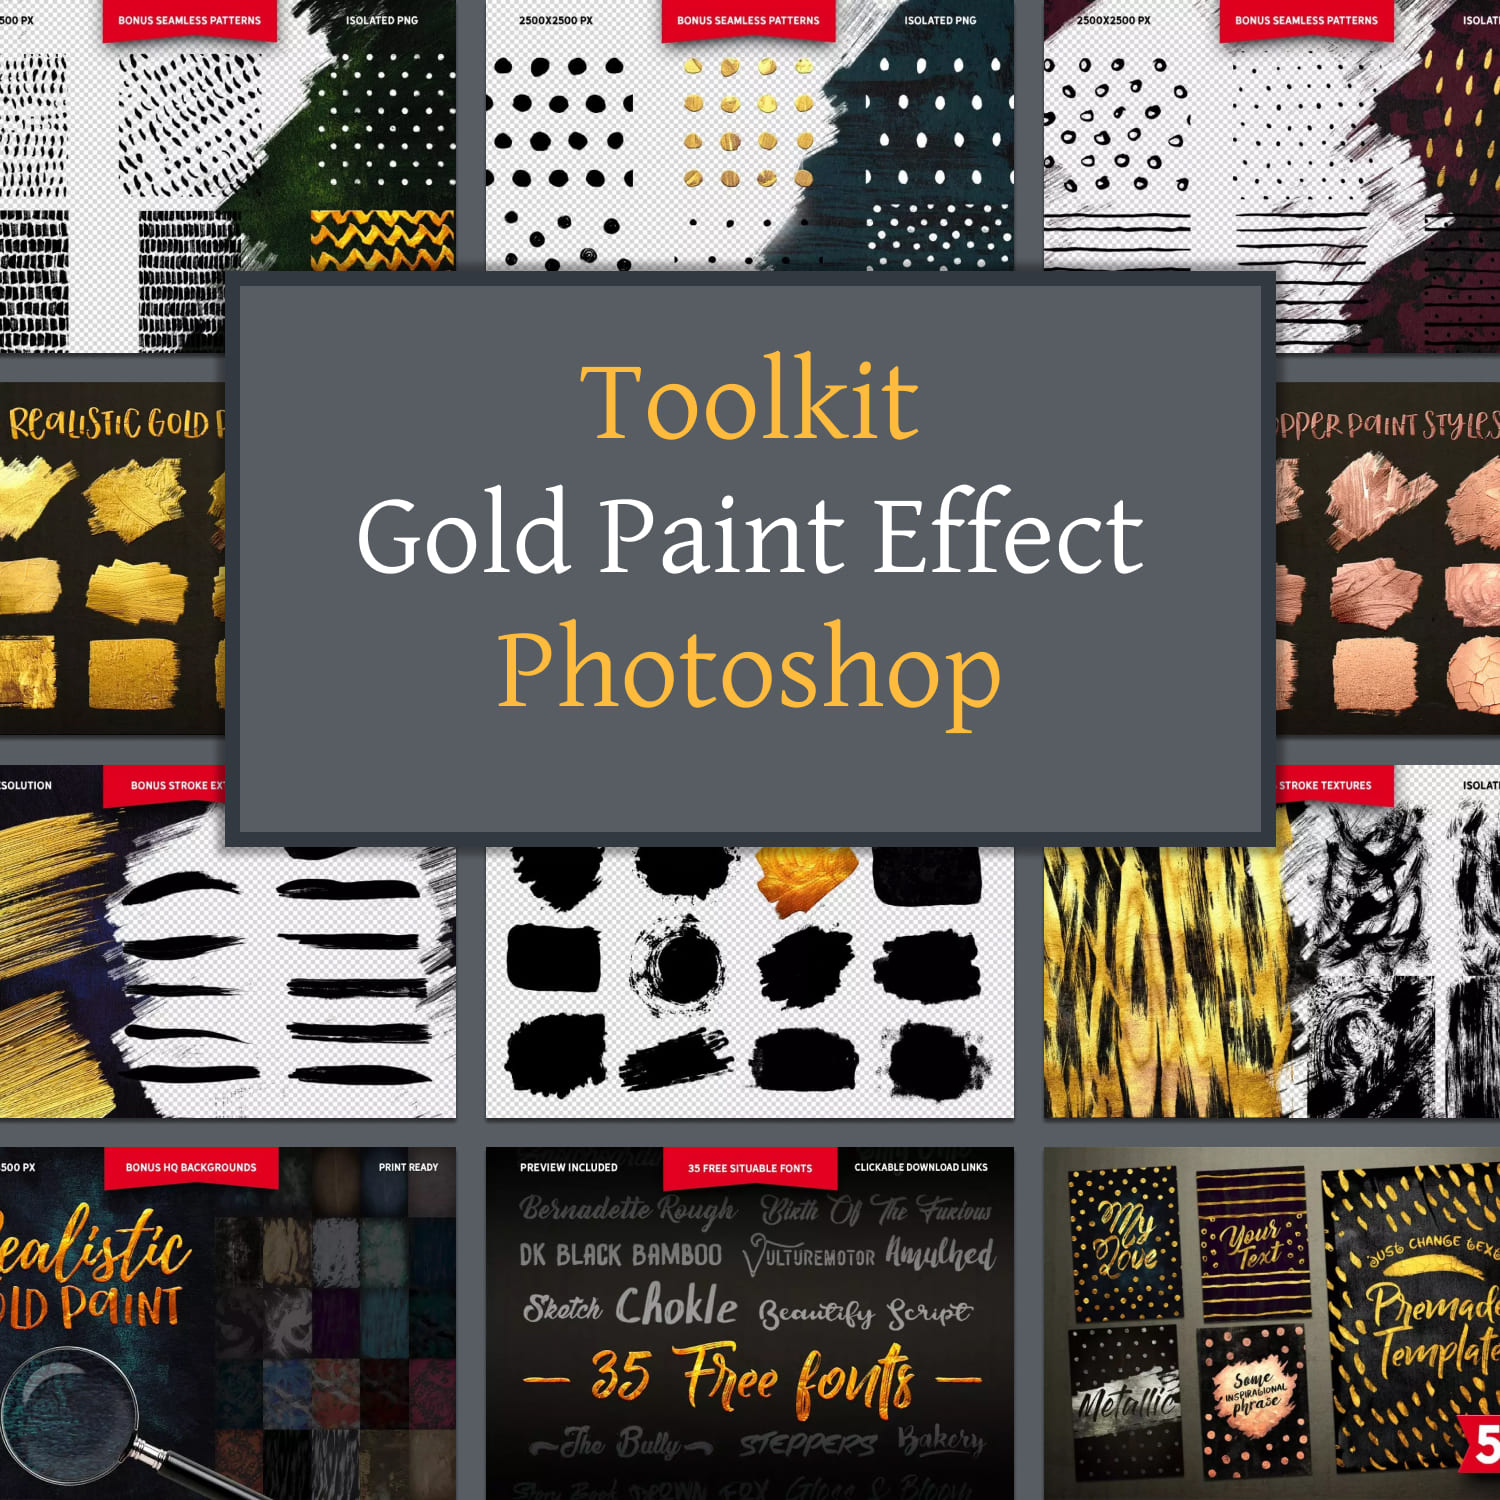 TOOLKIT Gold Paint Effect Photoshop.